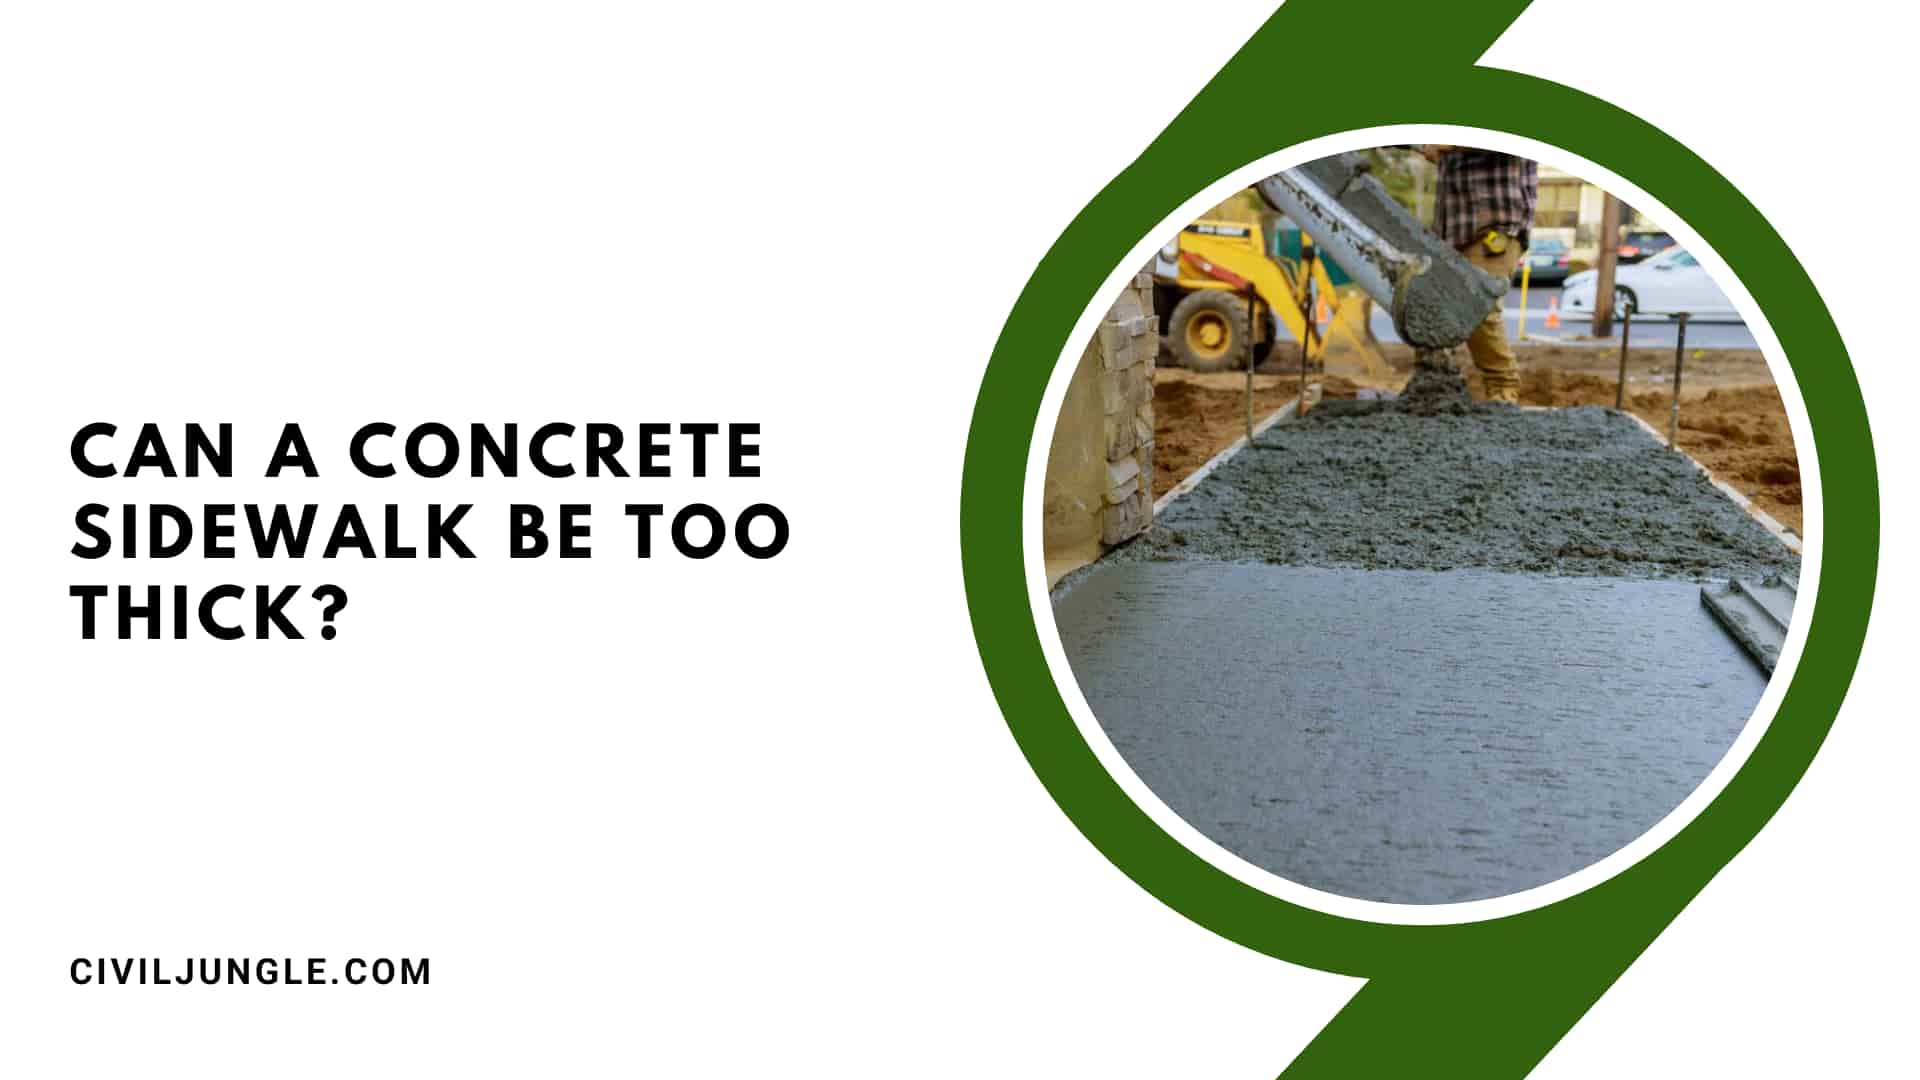 Can a Concrete Sidewalk Be Too Thick?